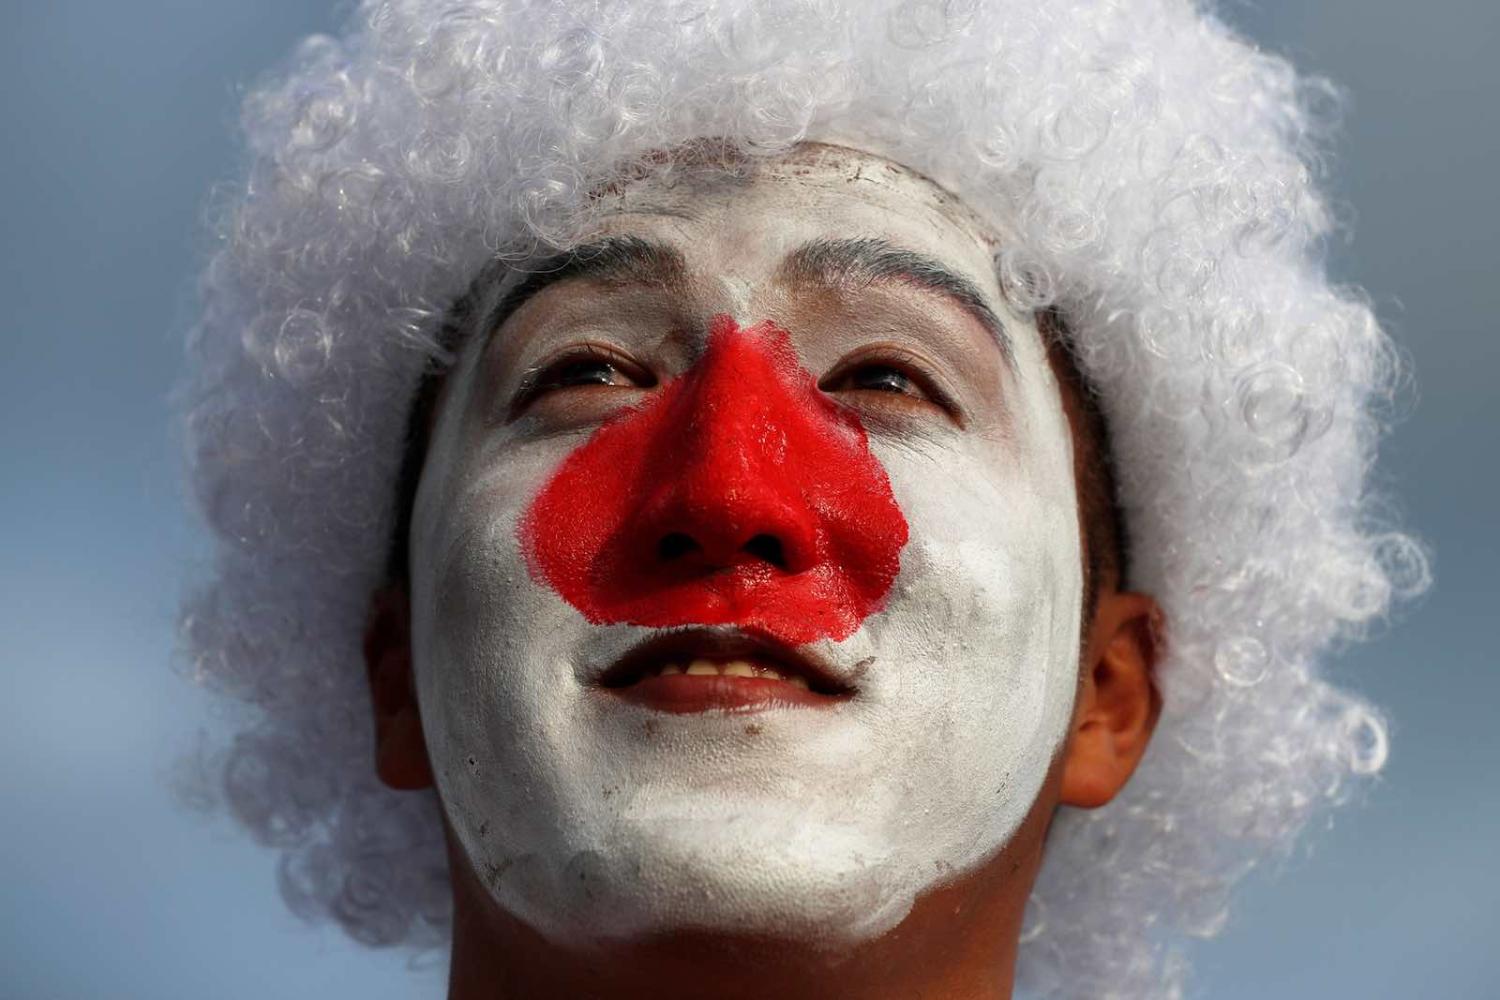 A Japan rugby fan outside the Shizuoka Stadium Ecopa in Shizuoka prefecture, 4 October 2019 (Photo: Adrian Dennis/AFP/Getty Images)